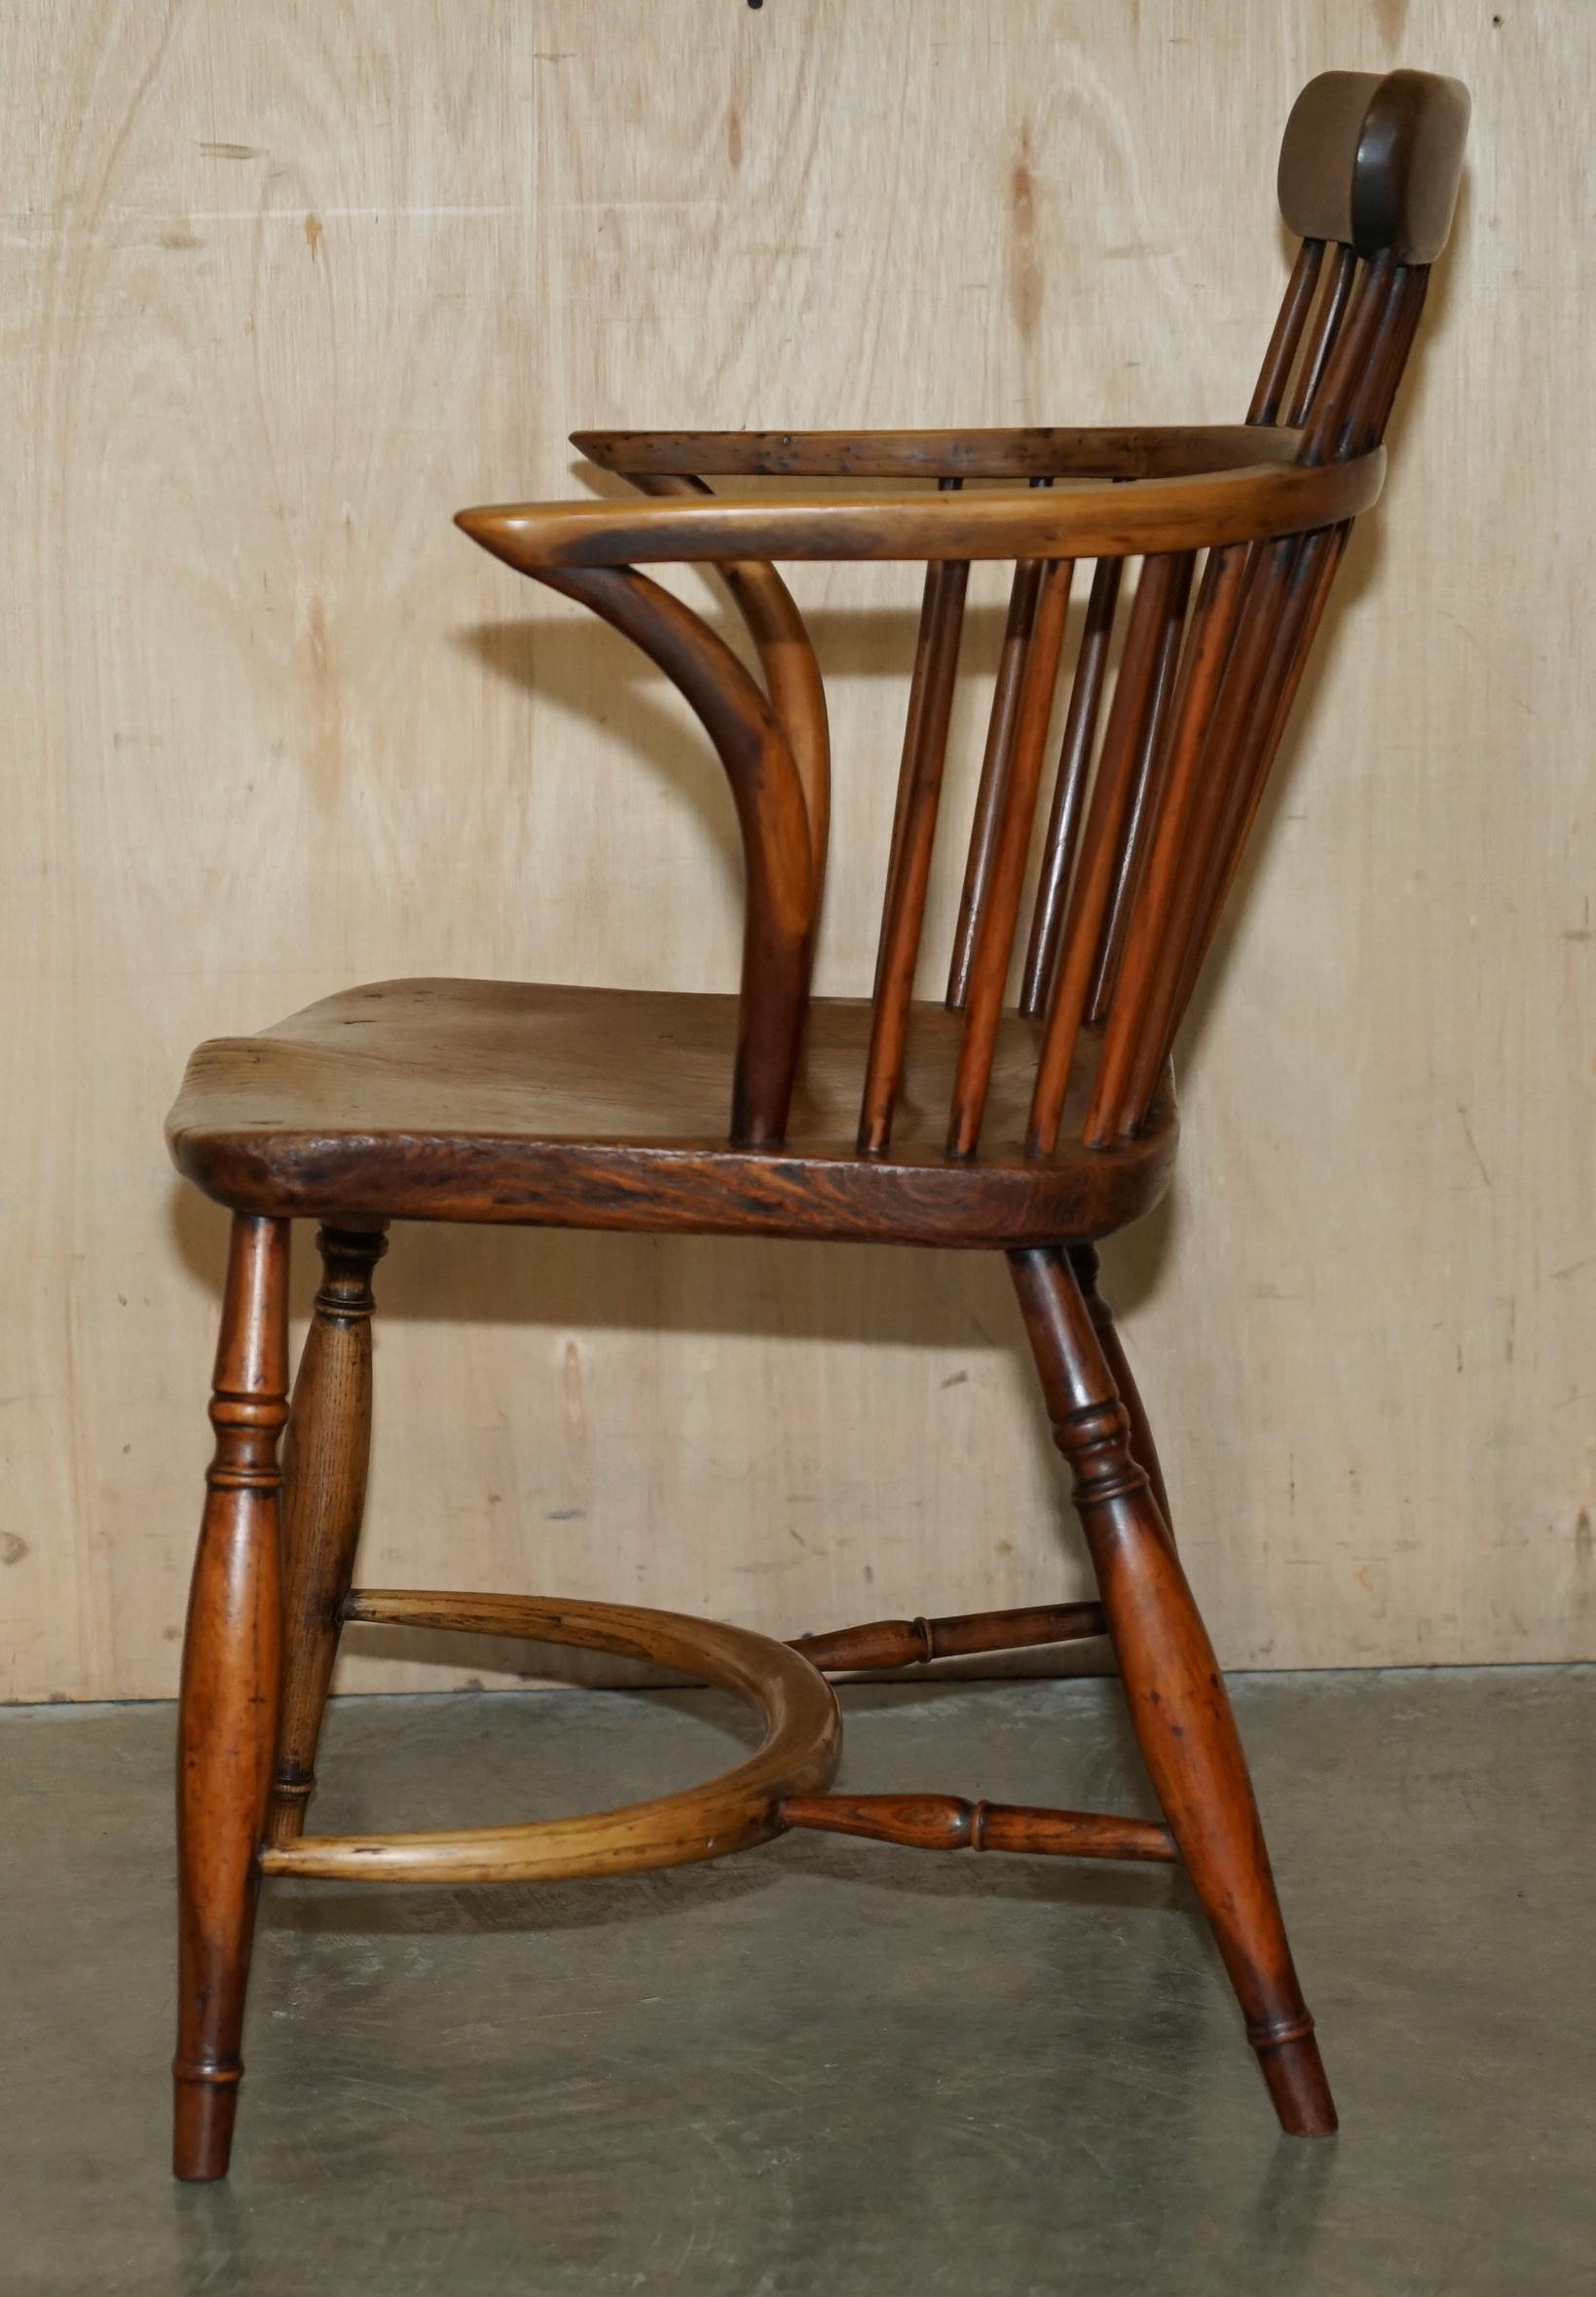 FINE ANTiQUE EARLY 19TH CENTURY BURR YEW WOOD & ELM COMB BACK WINDSOR ARMCHAIR For Sale 9